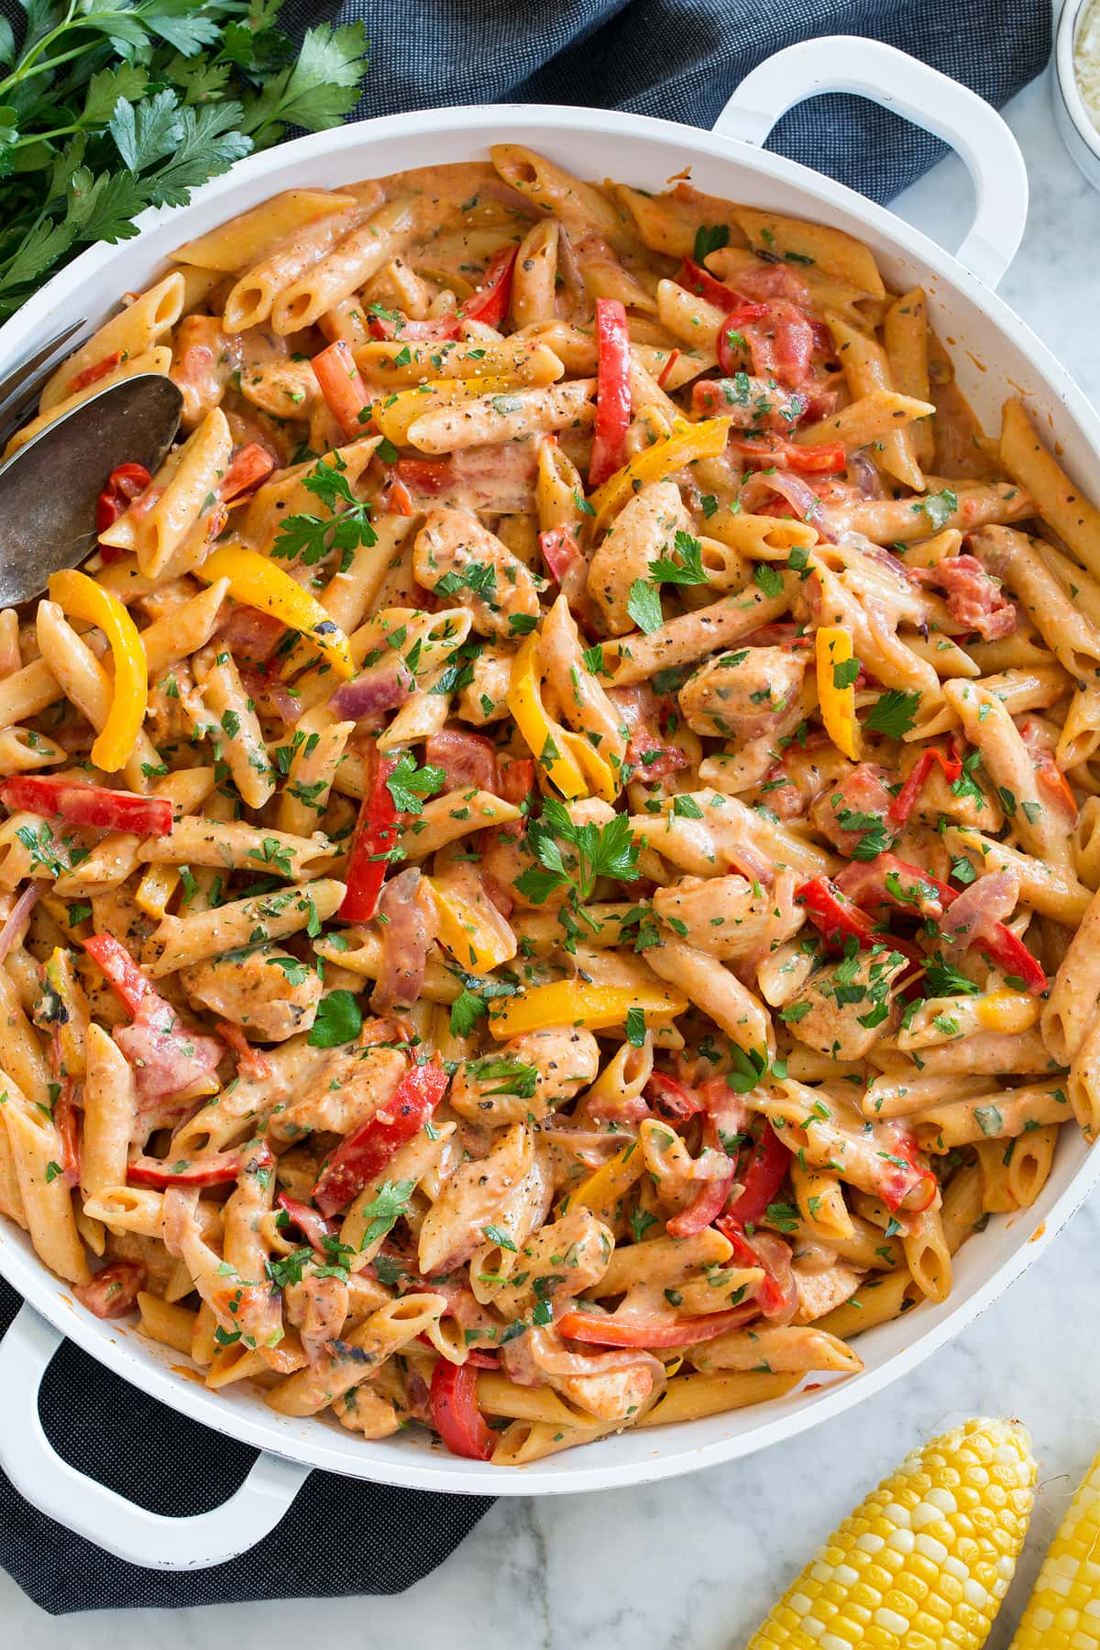 A Symphony of Southern Delights: Cajun Chicken Pasta and More!